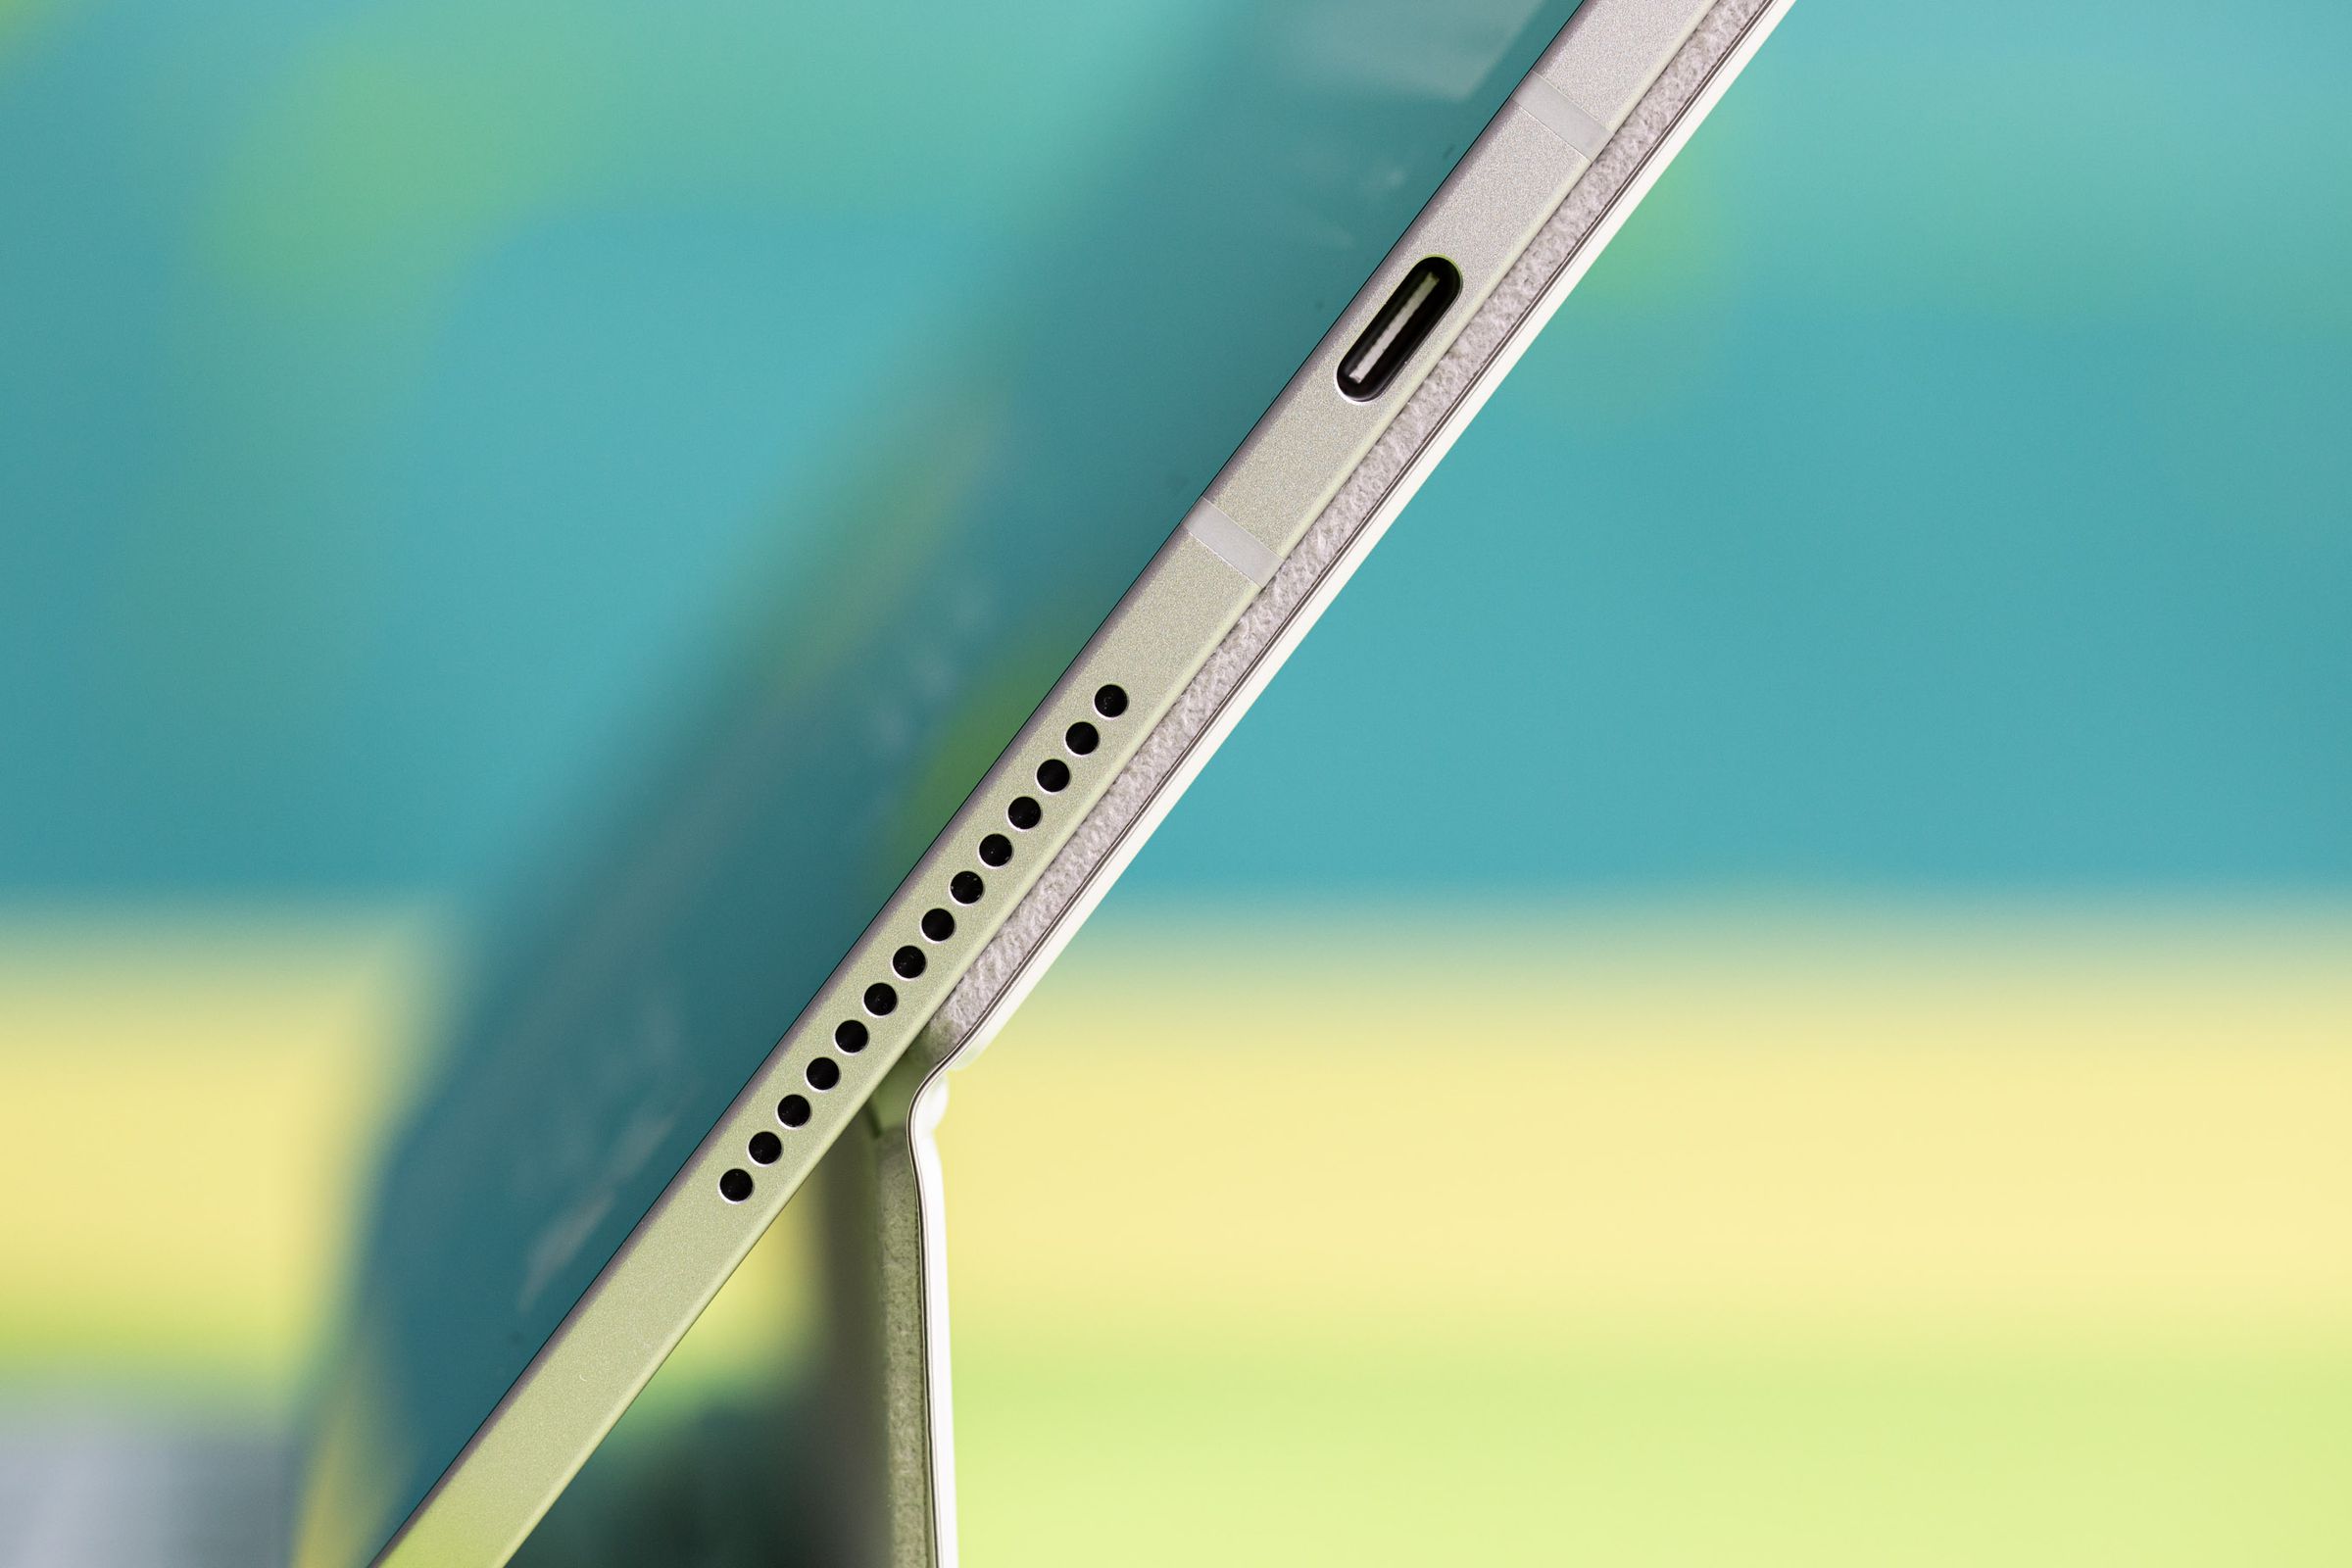 A photo of the edge of an iPad Pro, showing the speaker and USB-C port.